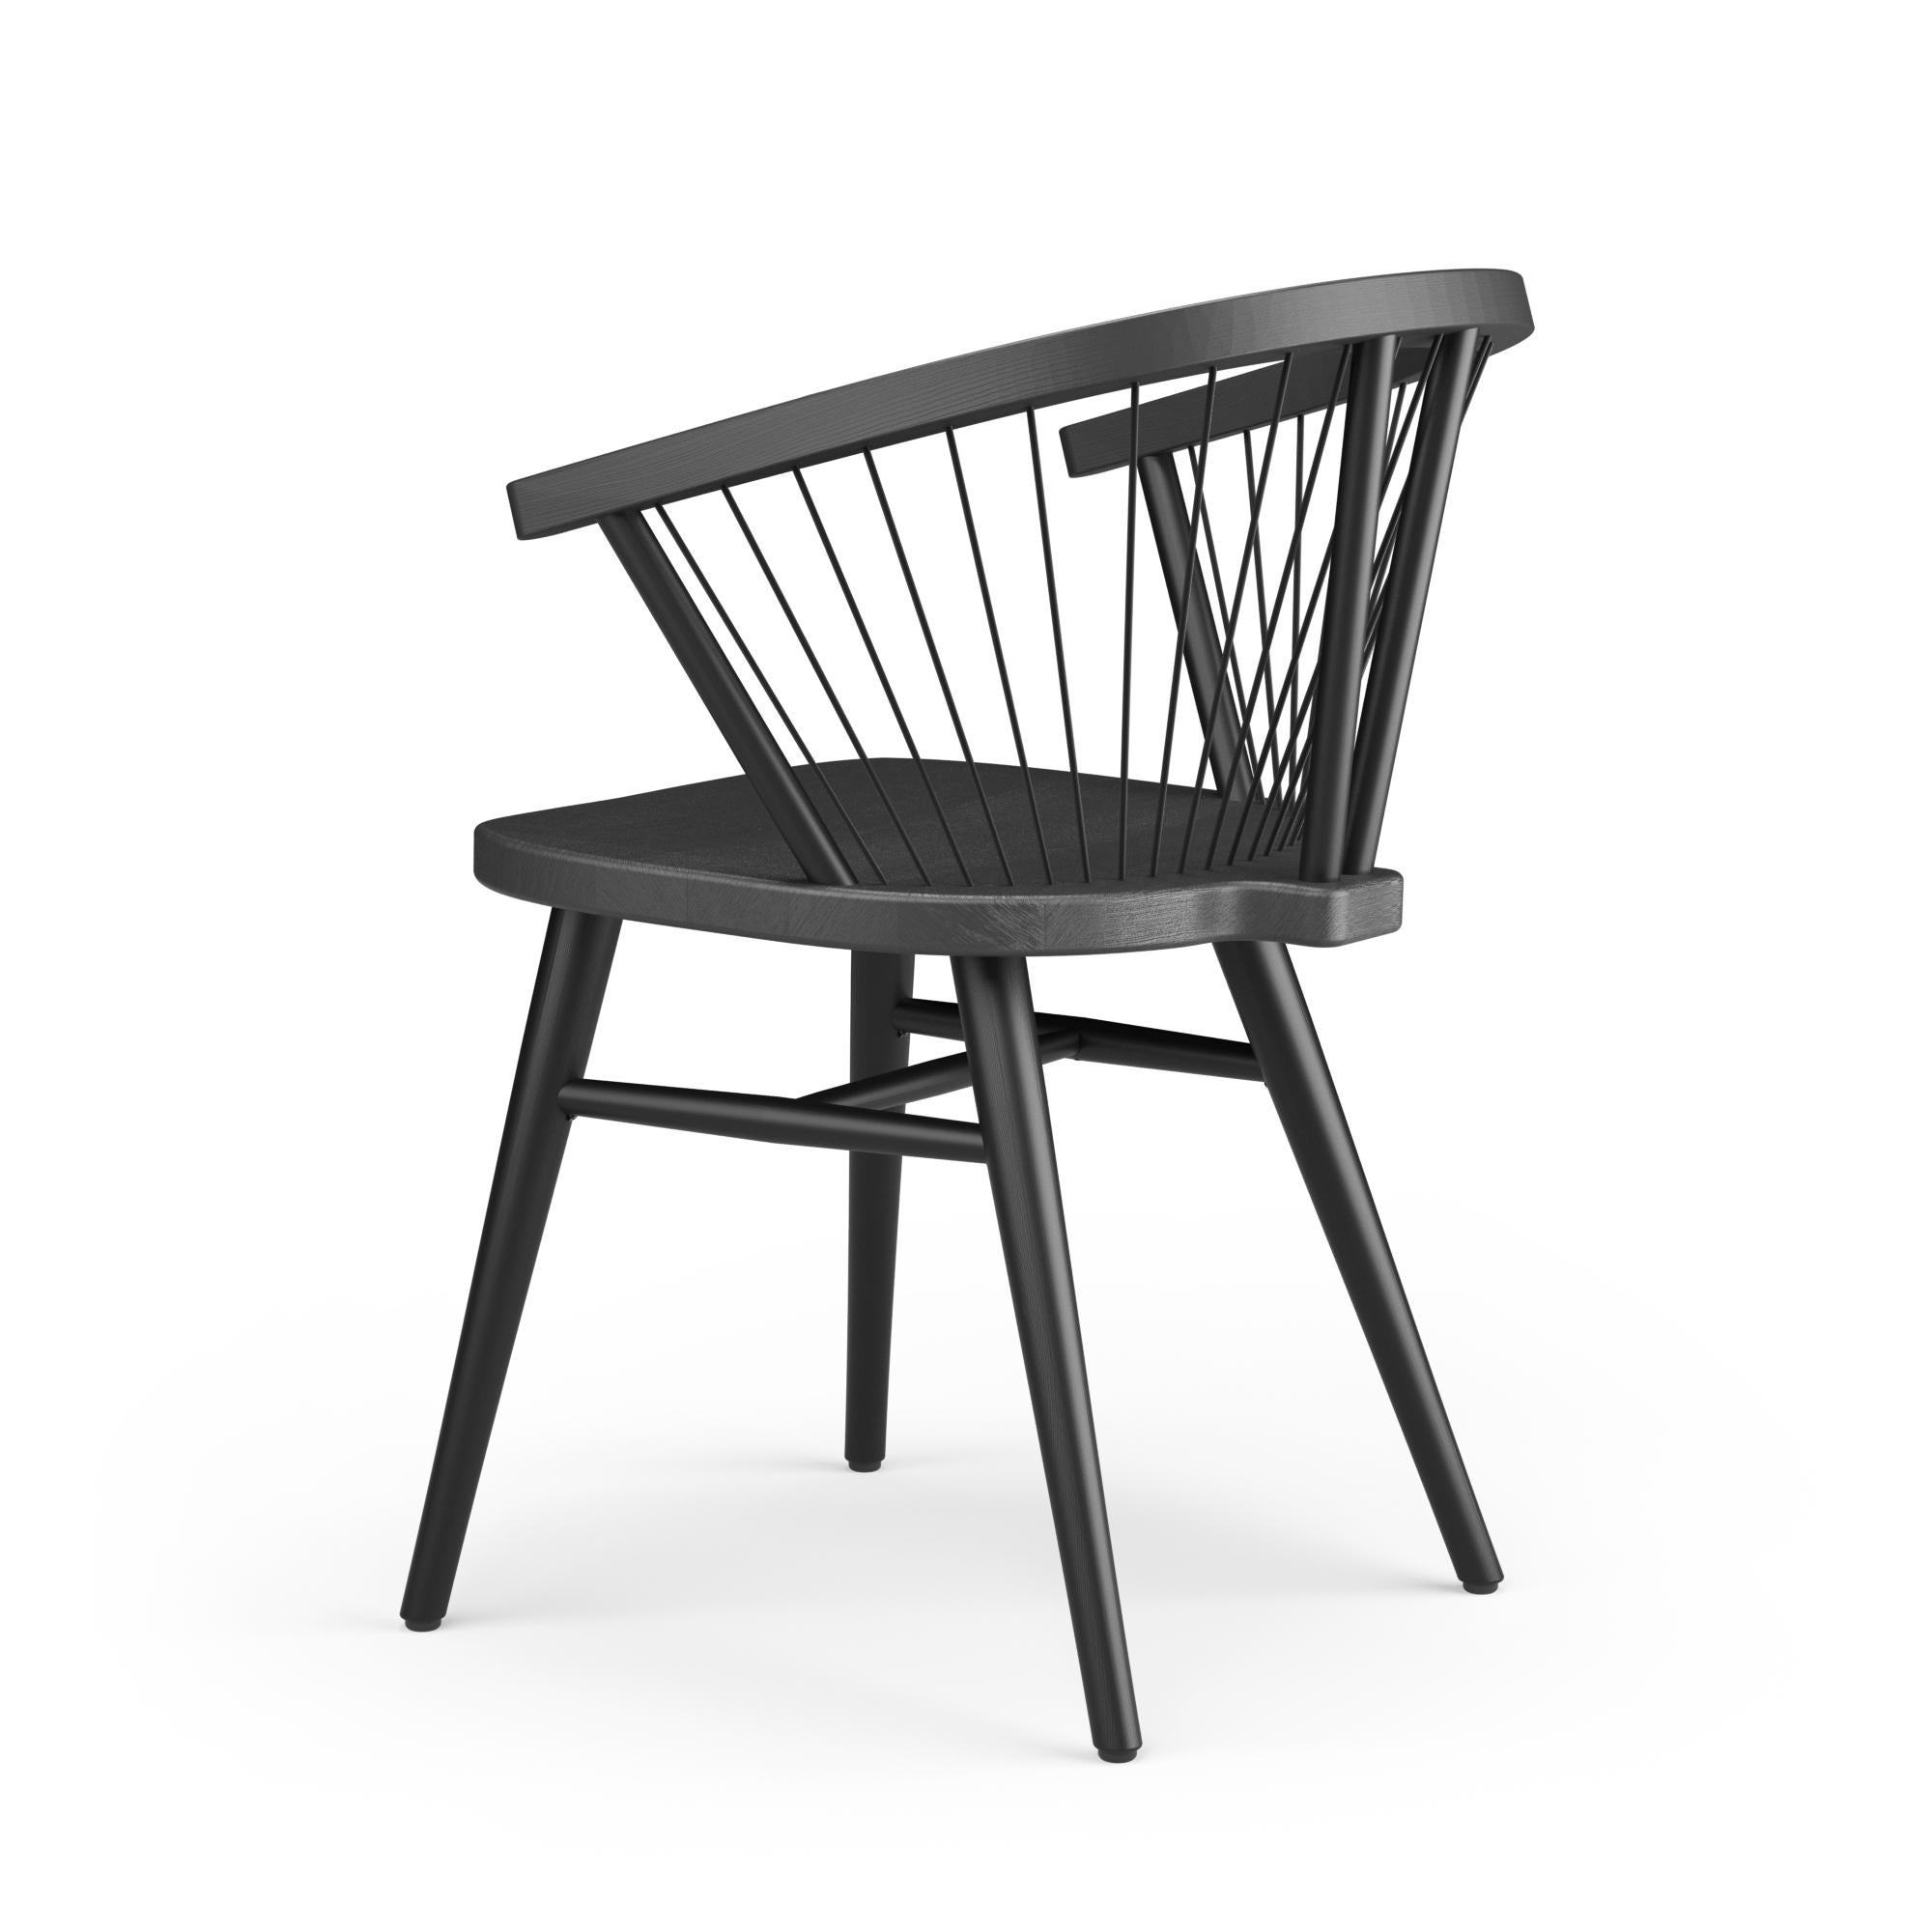 Mexican Hayche Cuerdas Rounded chair, Black, UK, Made To Order For Sale